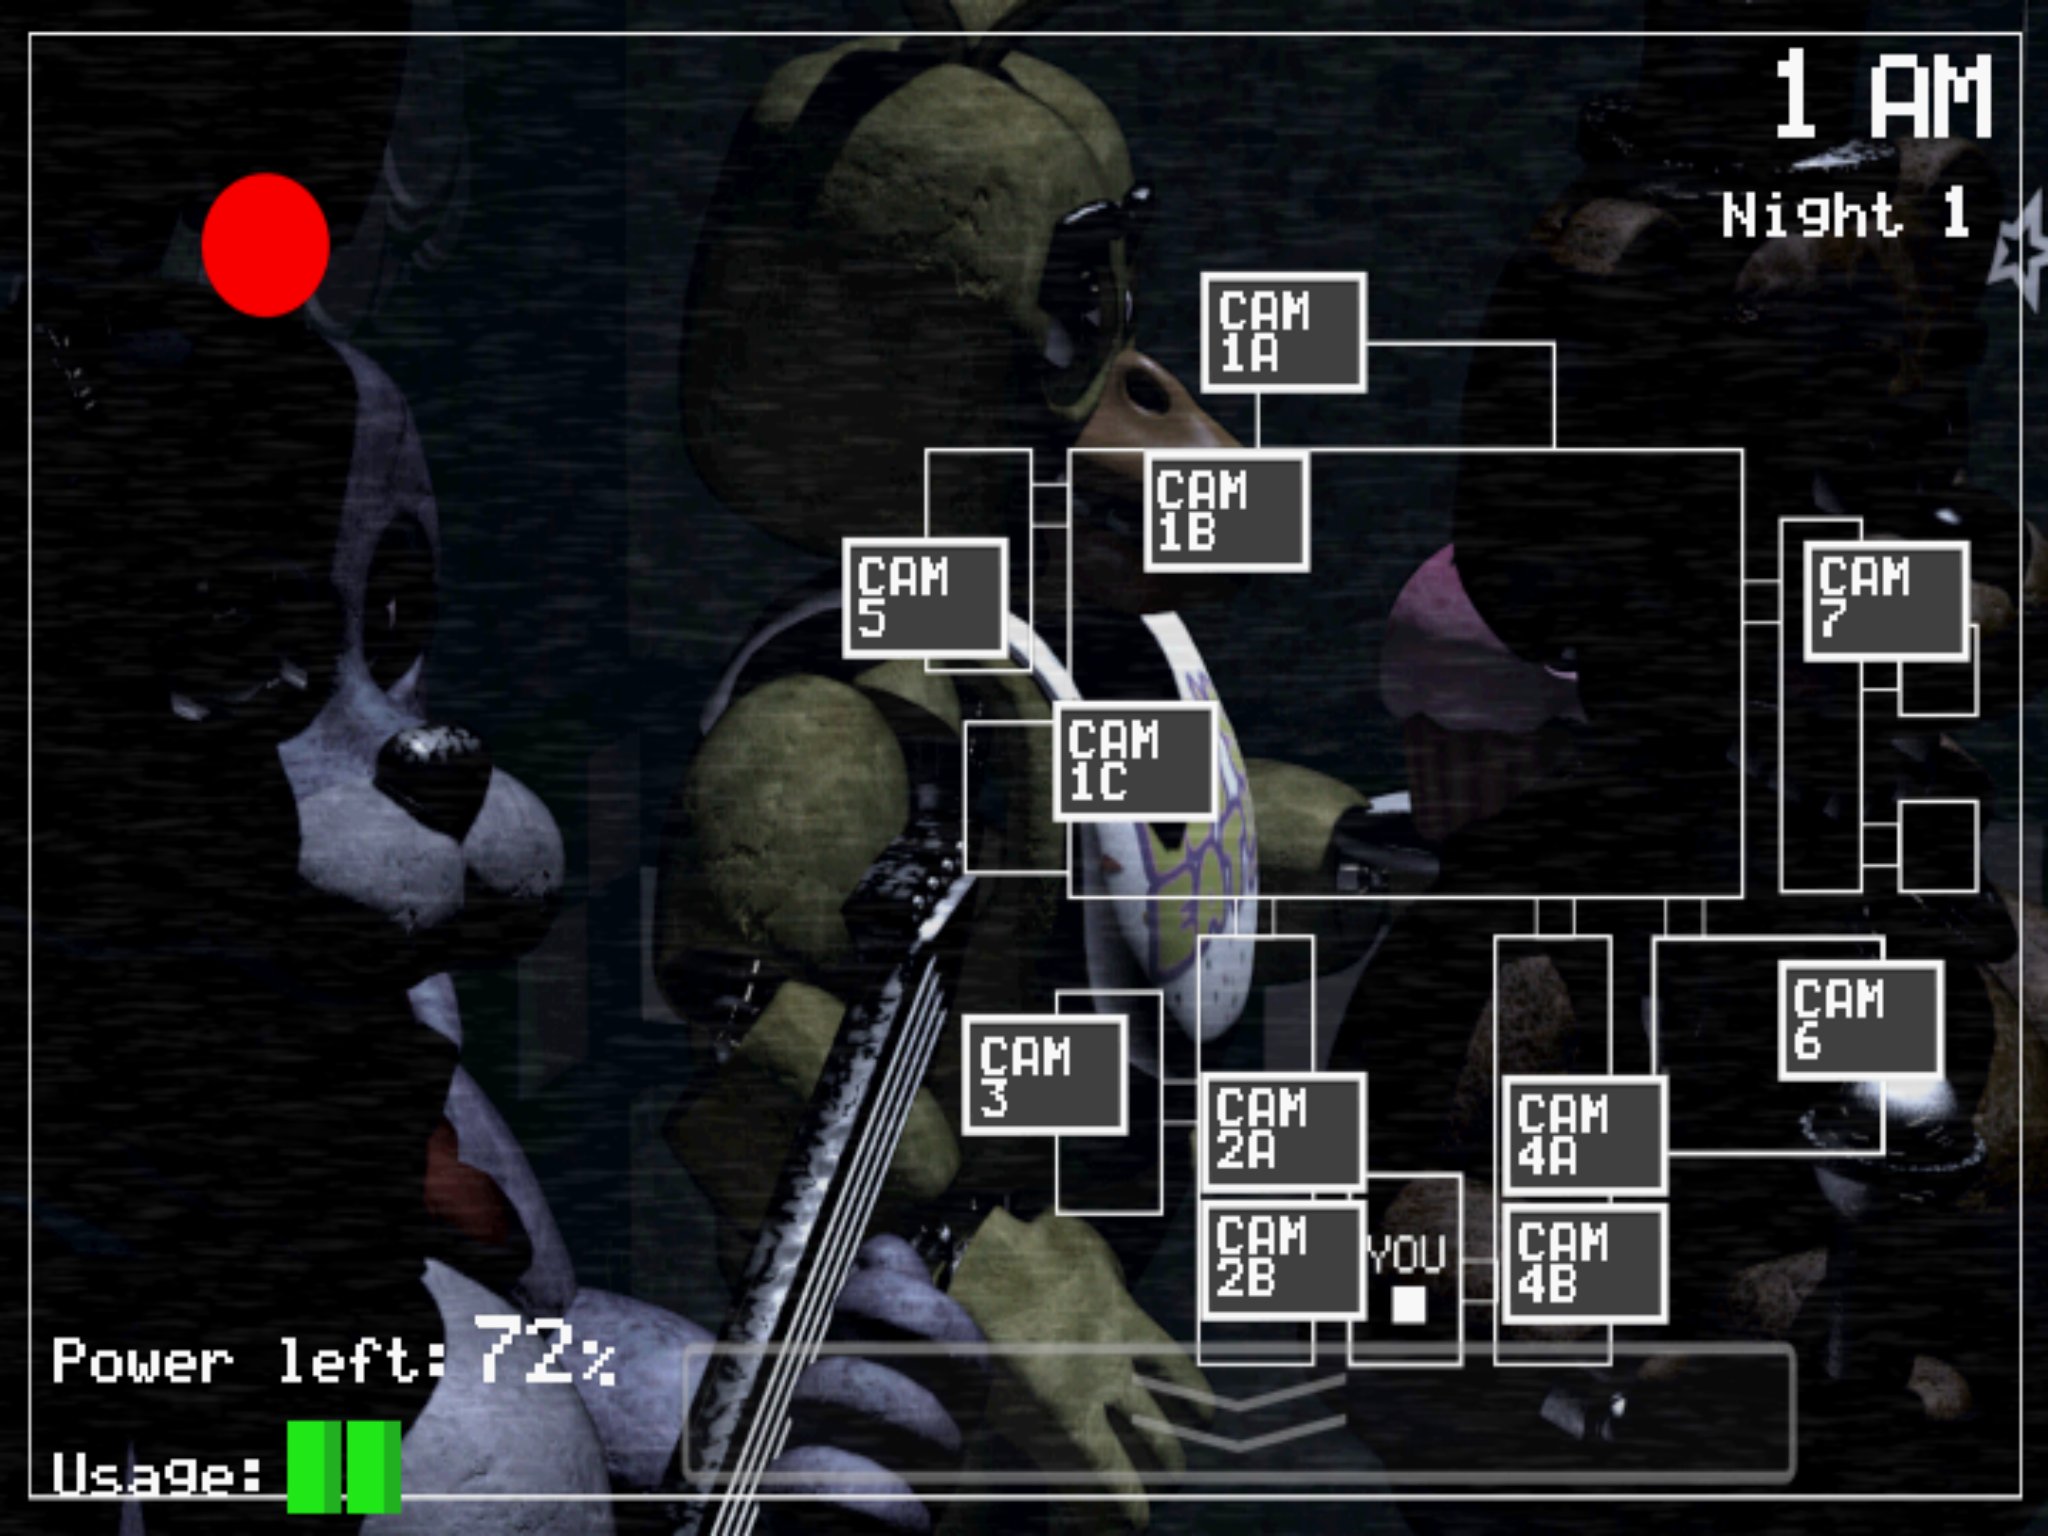 Five Nights at Freddy's Tips - How to Survive and Beat Five Nights-Game  Guides-LDPlayer